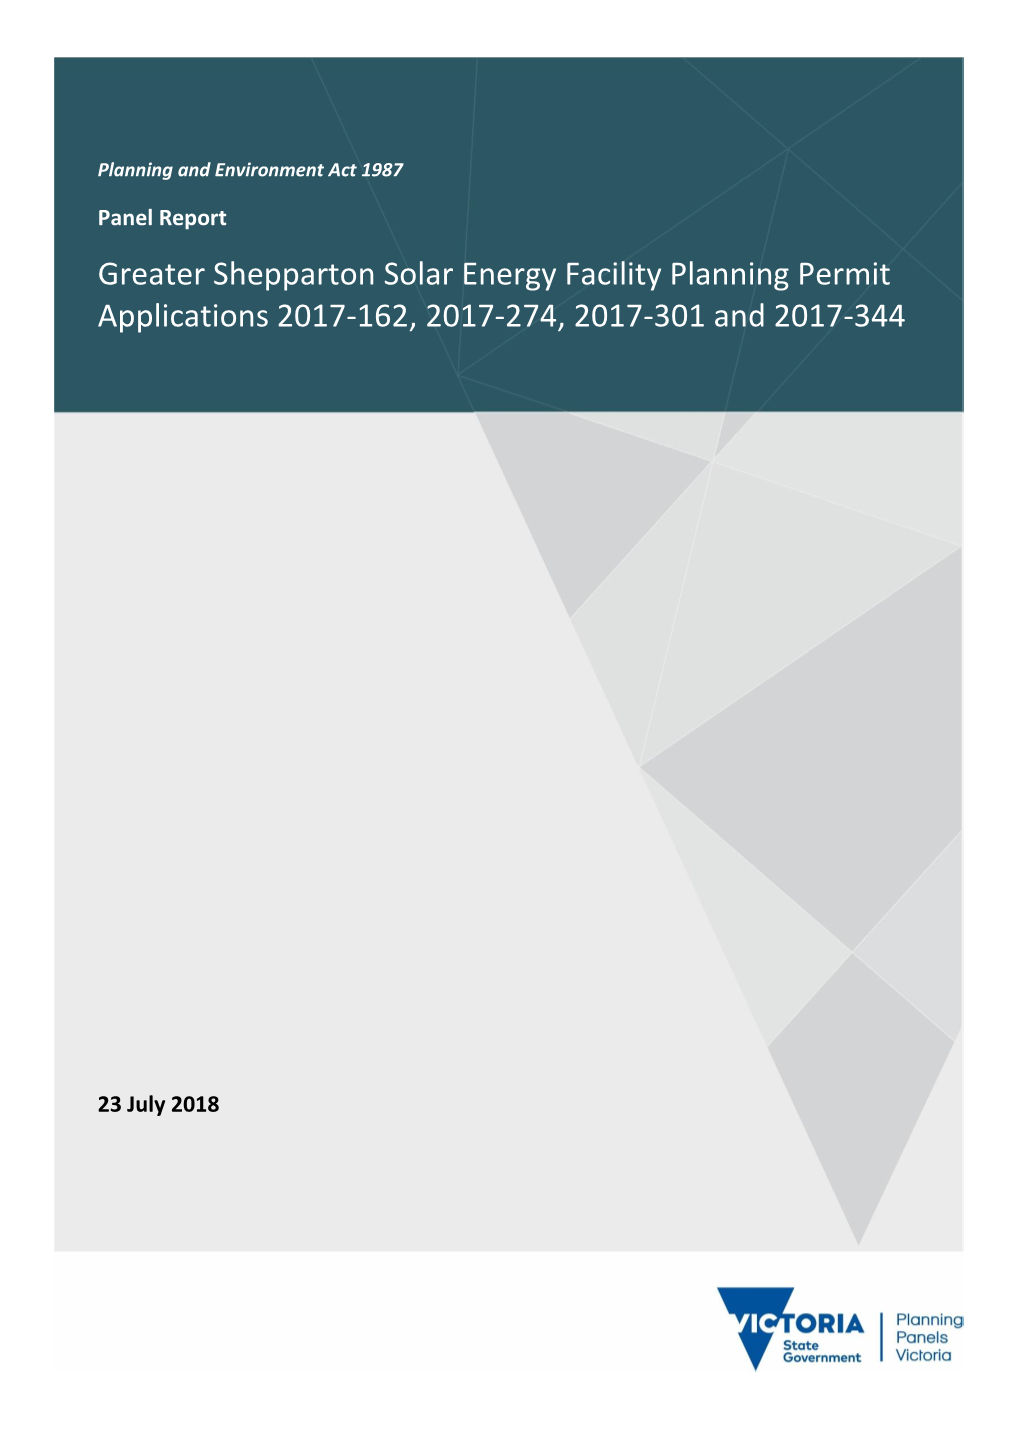 Greater Shepparton Solar Energy Facility Planning Permit Applications 2017-162, 2017-274, 2017-301 and 2017-344